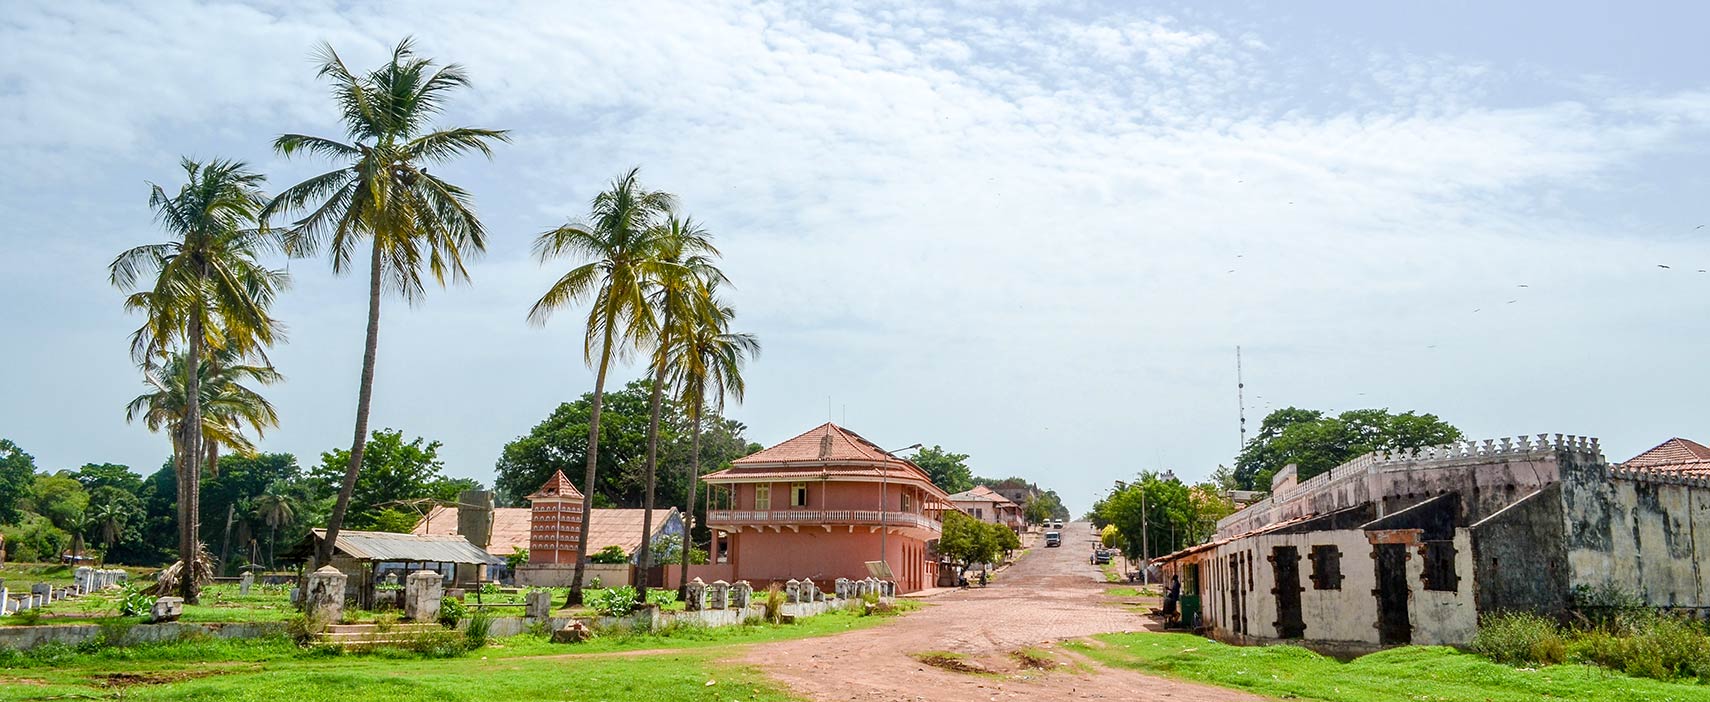 Colonial town of Bafata in Guinea-Bissau